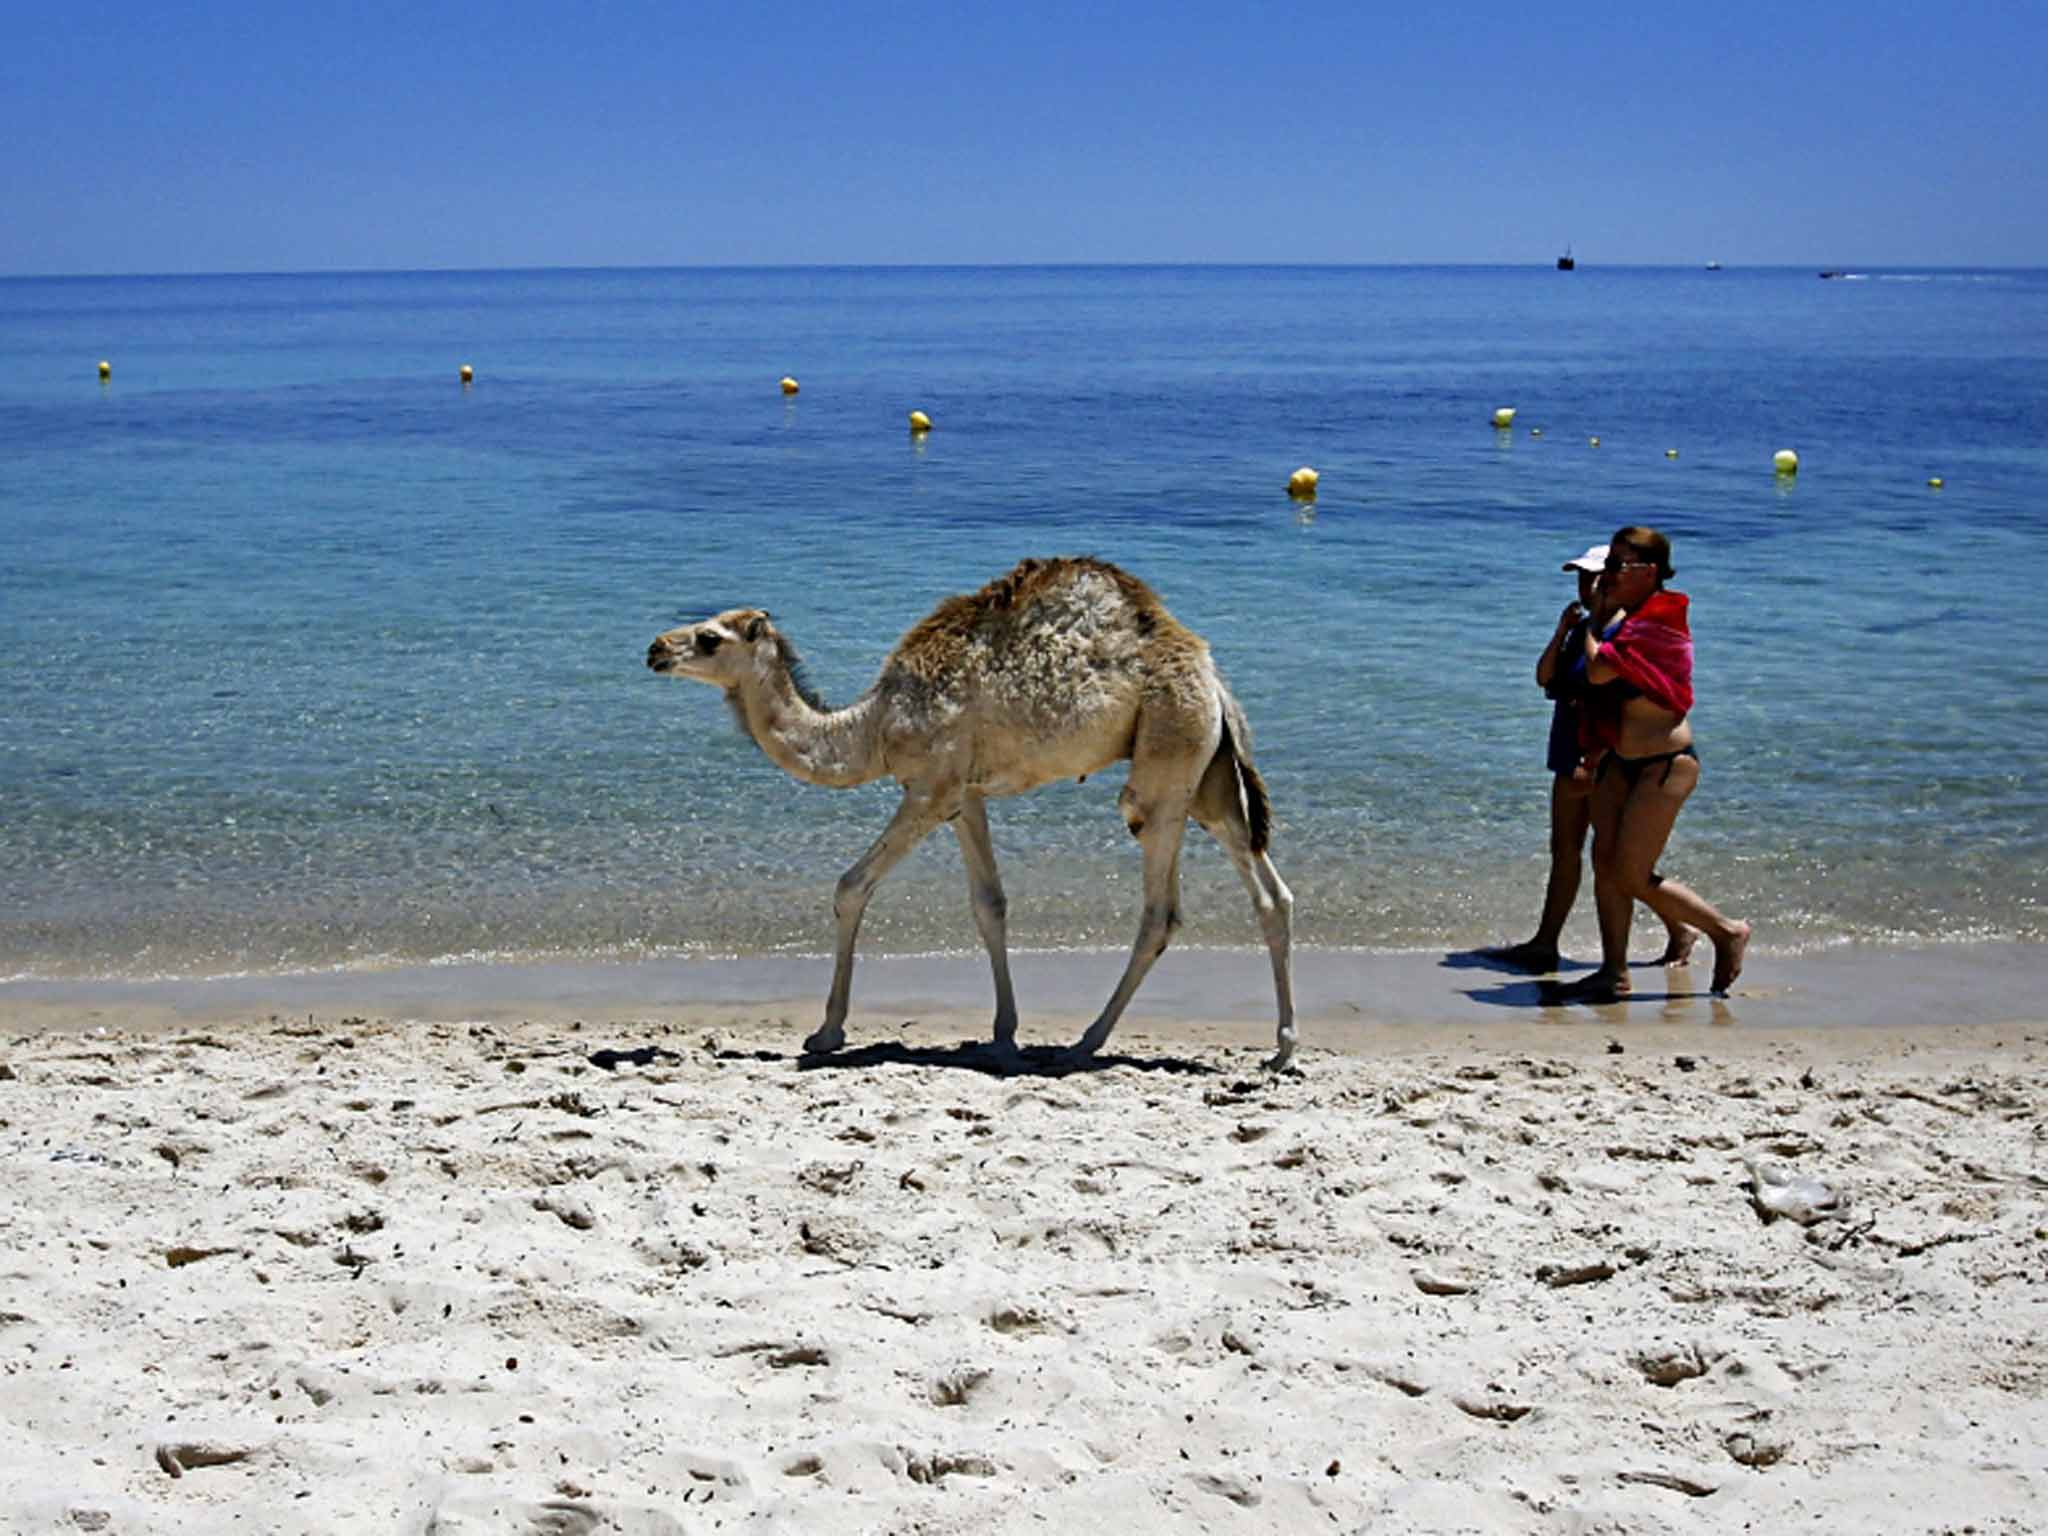 Footprints in the sand: Tunisia's economy relies on tourism